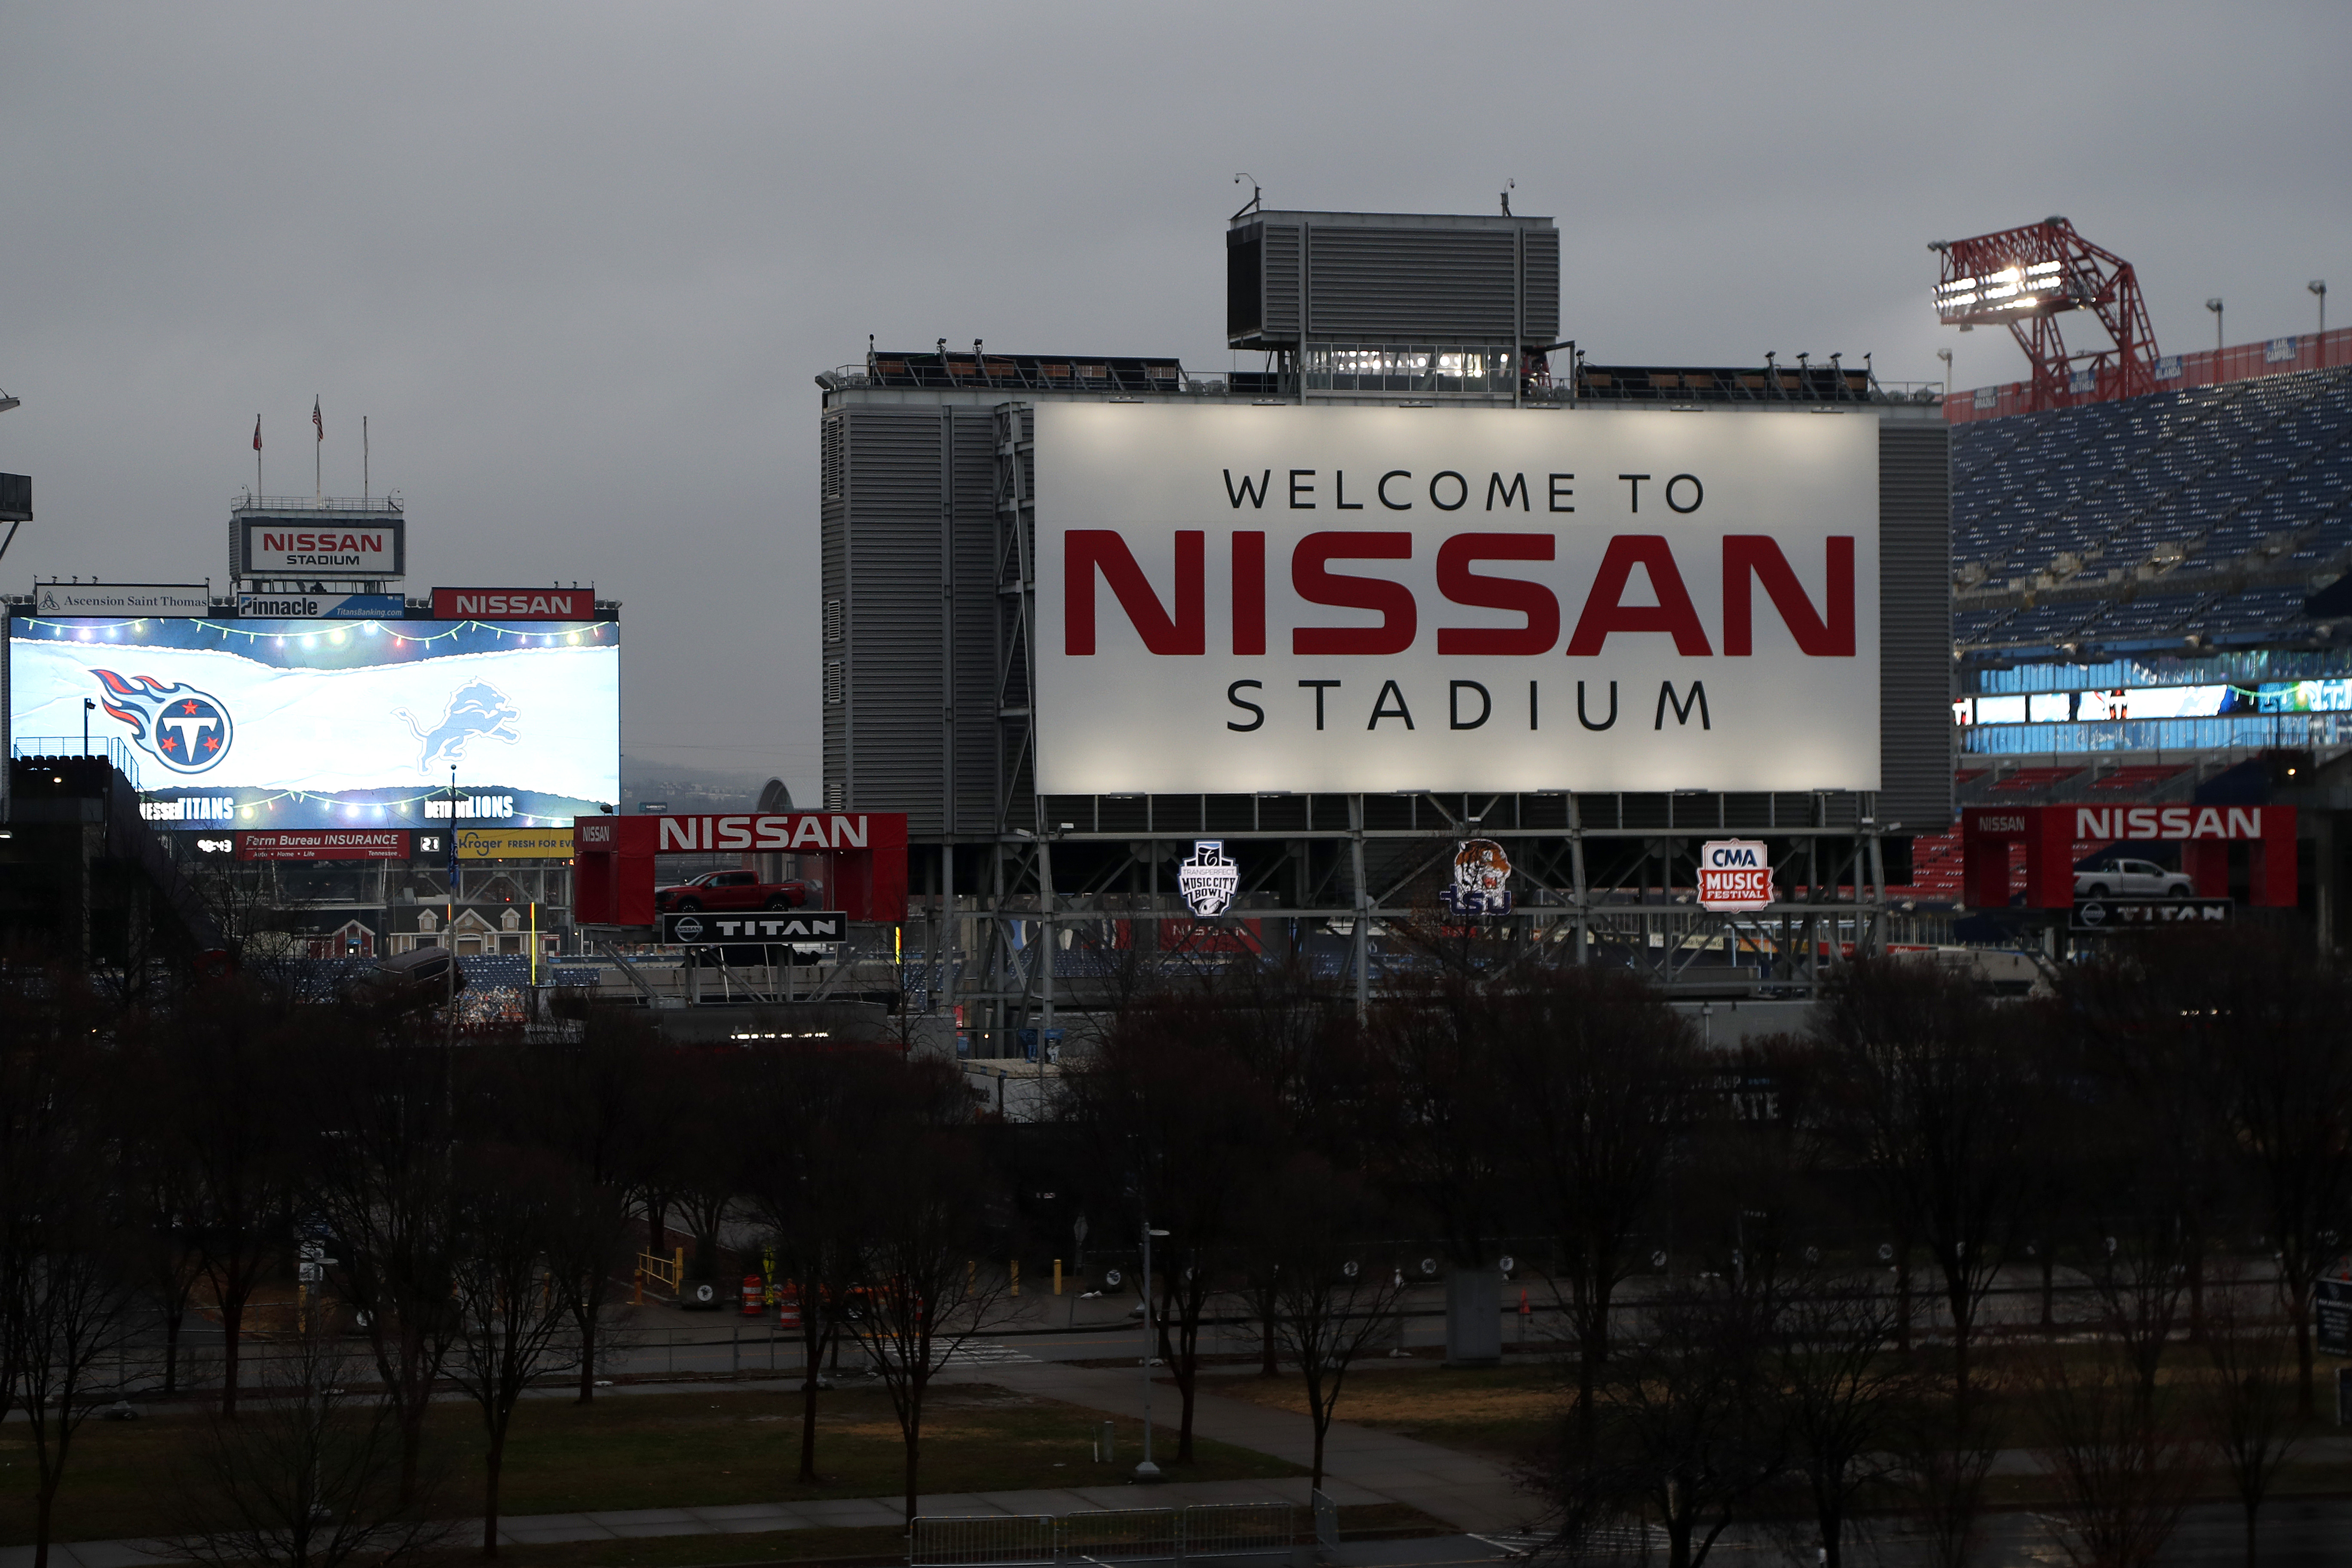 A general view outside of the Nissan Stadium prior to the Detroit Lions and Tennessee Titans game on December 20, 2020 in Nashville, Tennessee.